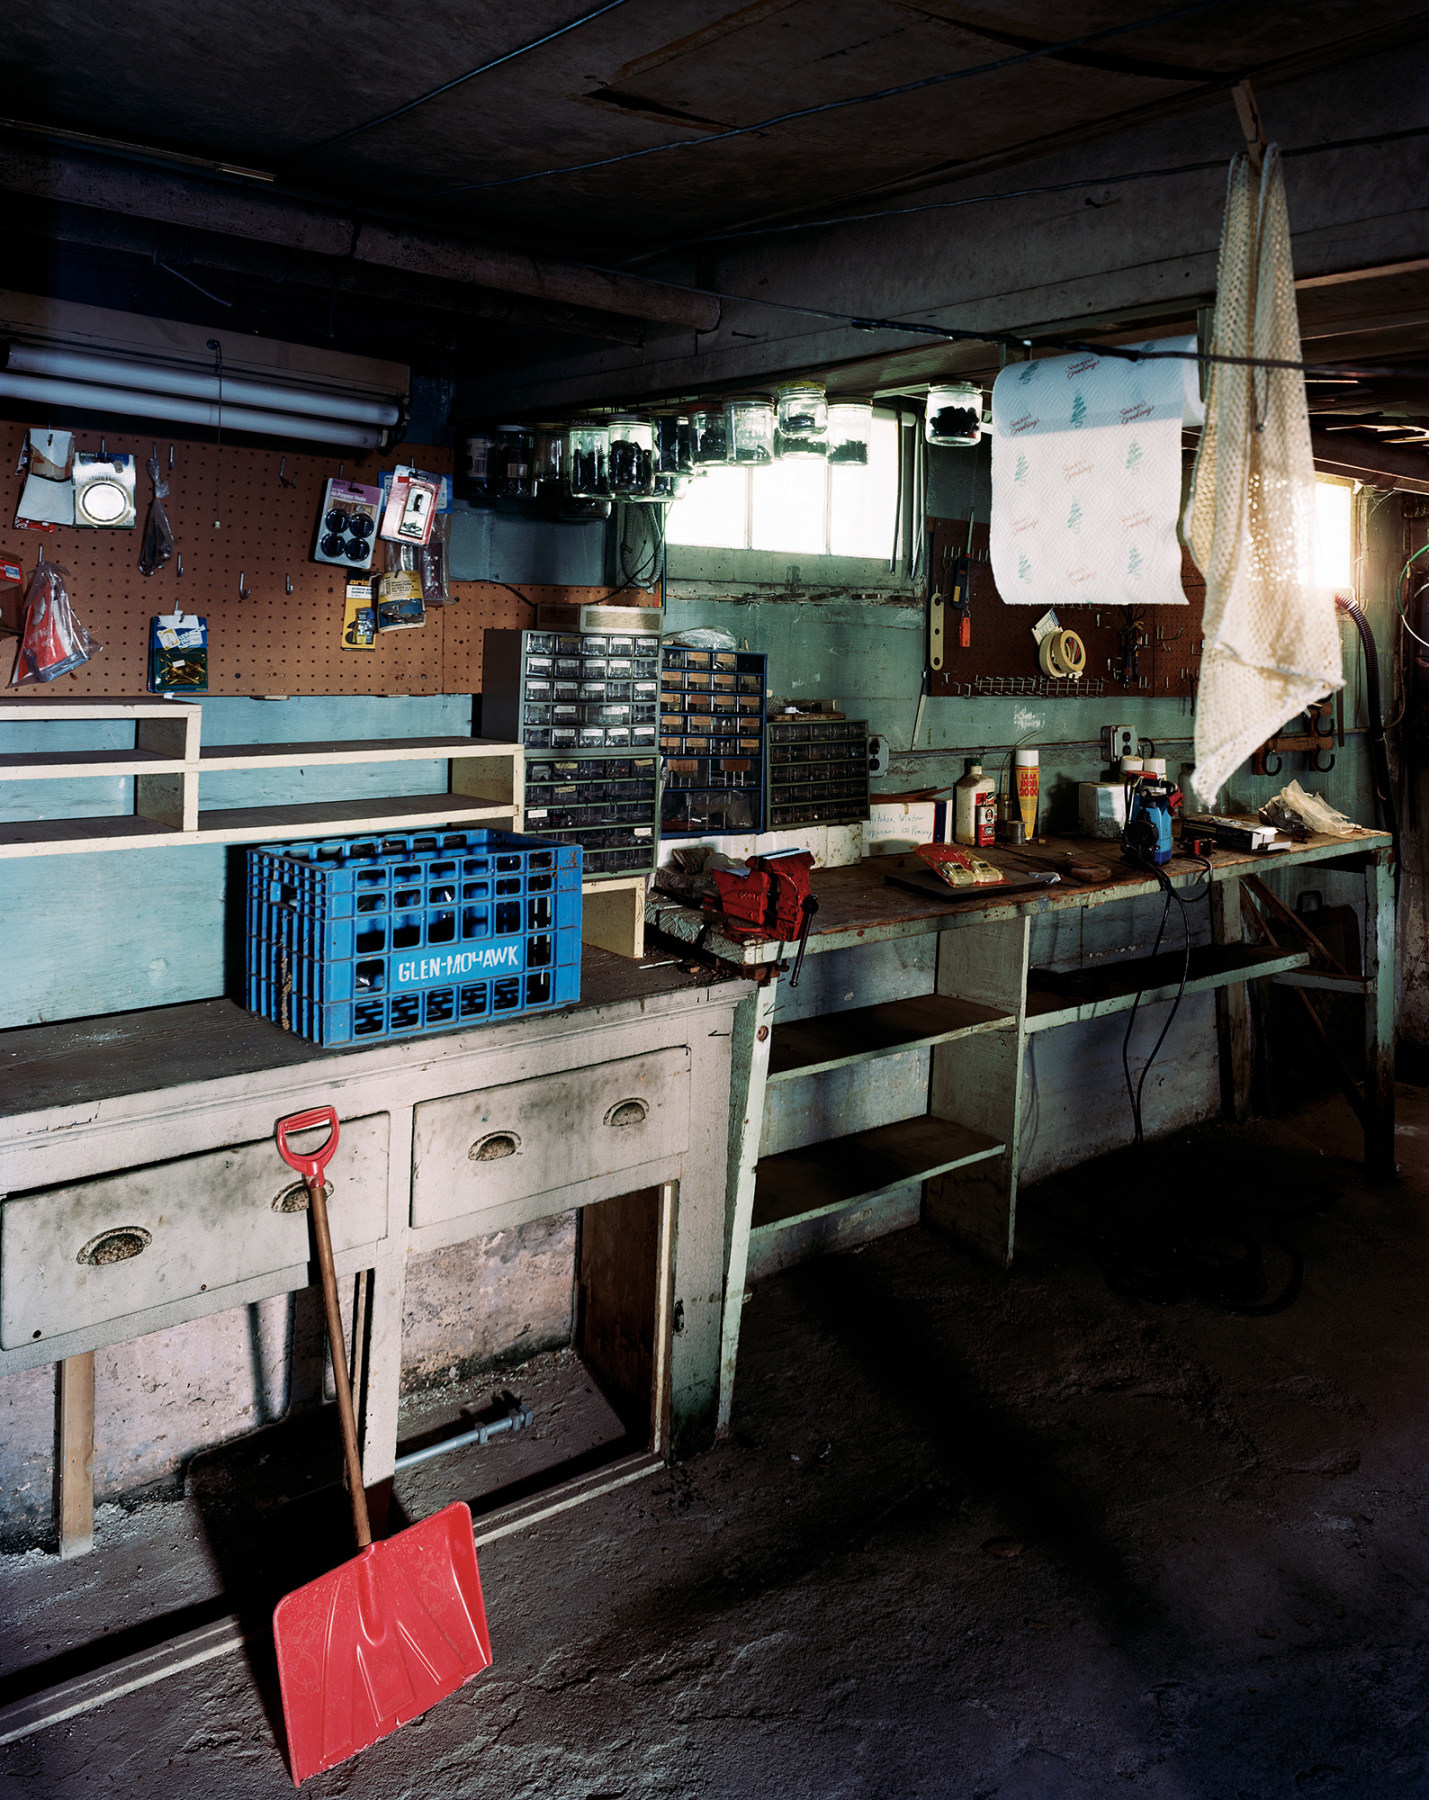 Color photograph of basement workshop area with red shovel, by Jade Doskow